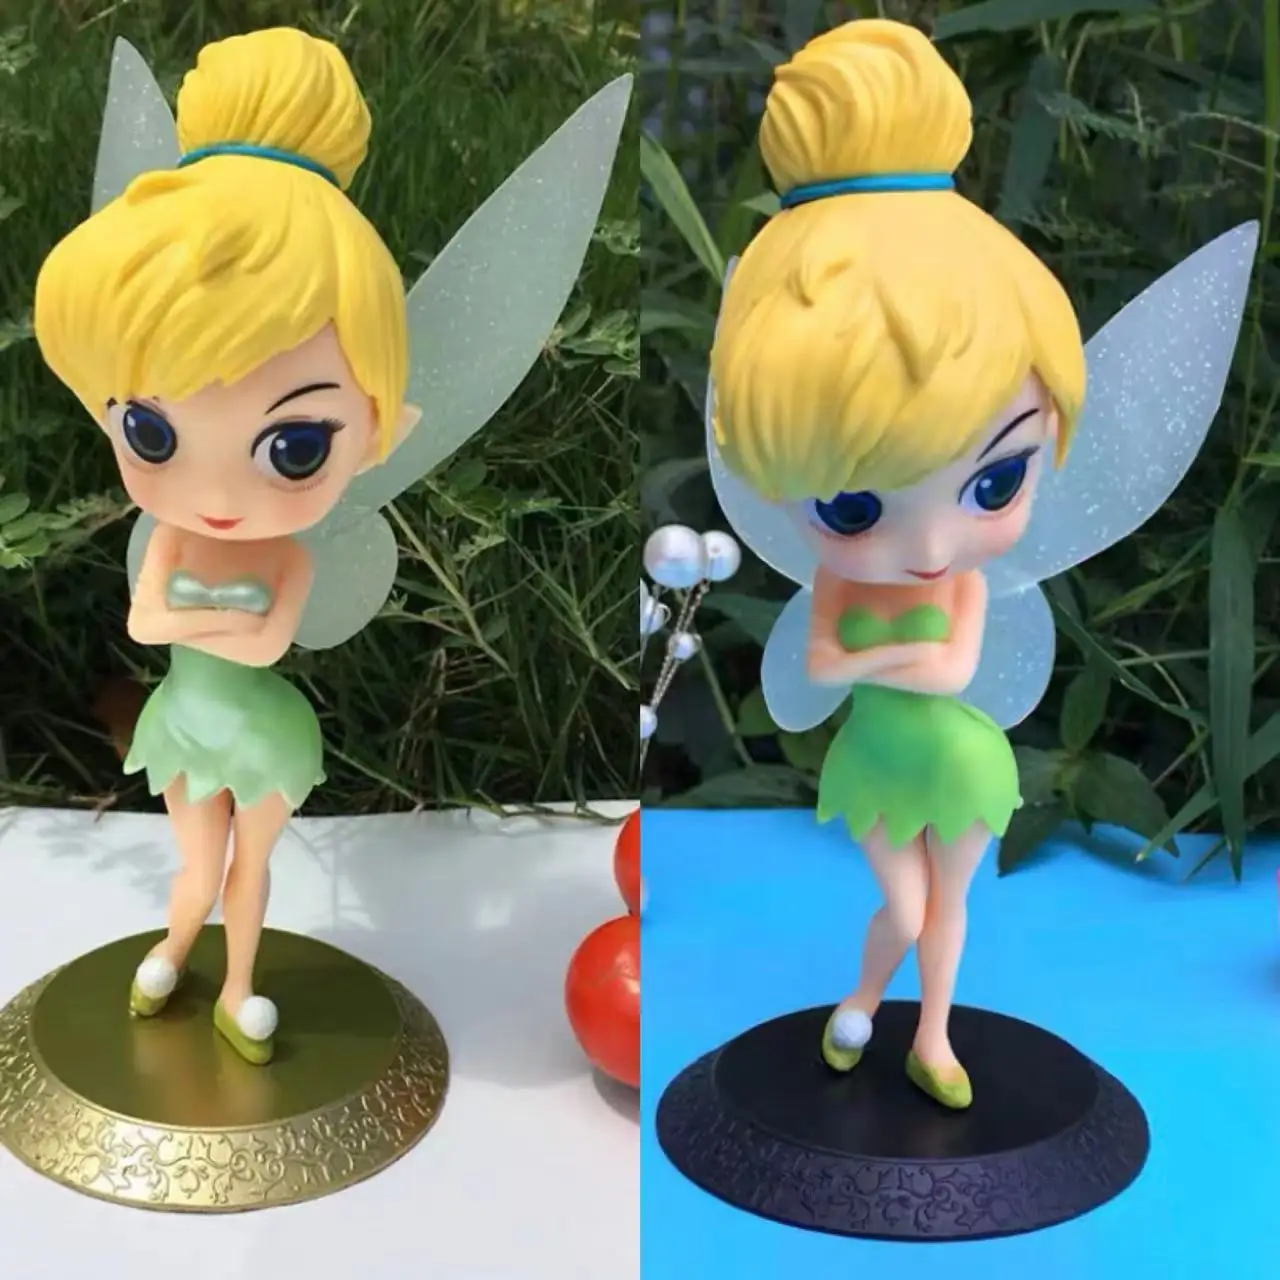 16cm Q Posket Tinkerbell Figure With Base Princess Tinker Bell PVC Action Figure Toys Model For Kids Gifts